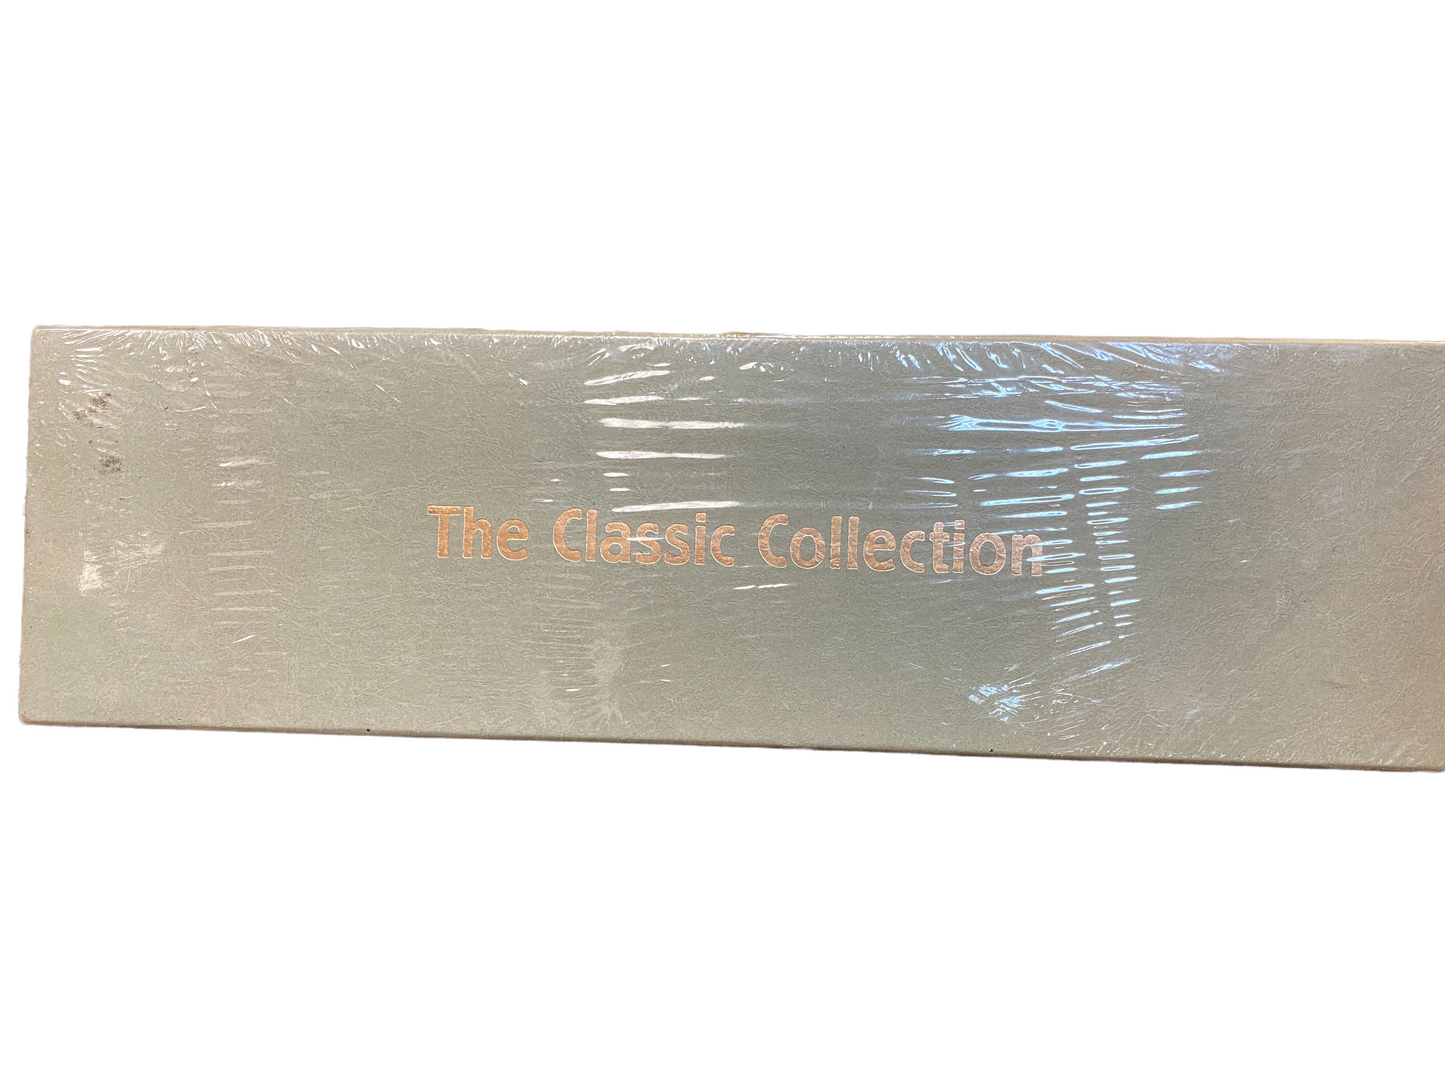 Cardinal Industries 2001 "The Classic Collection" Card Games